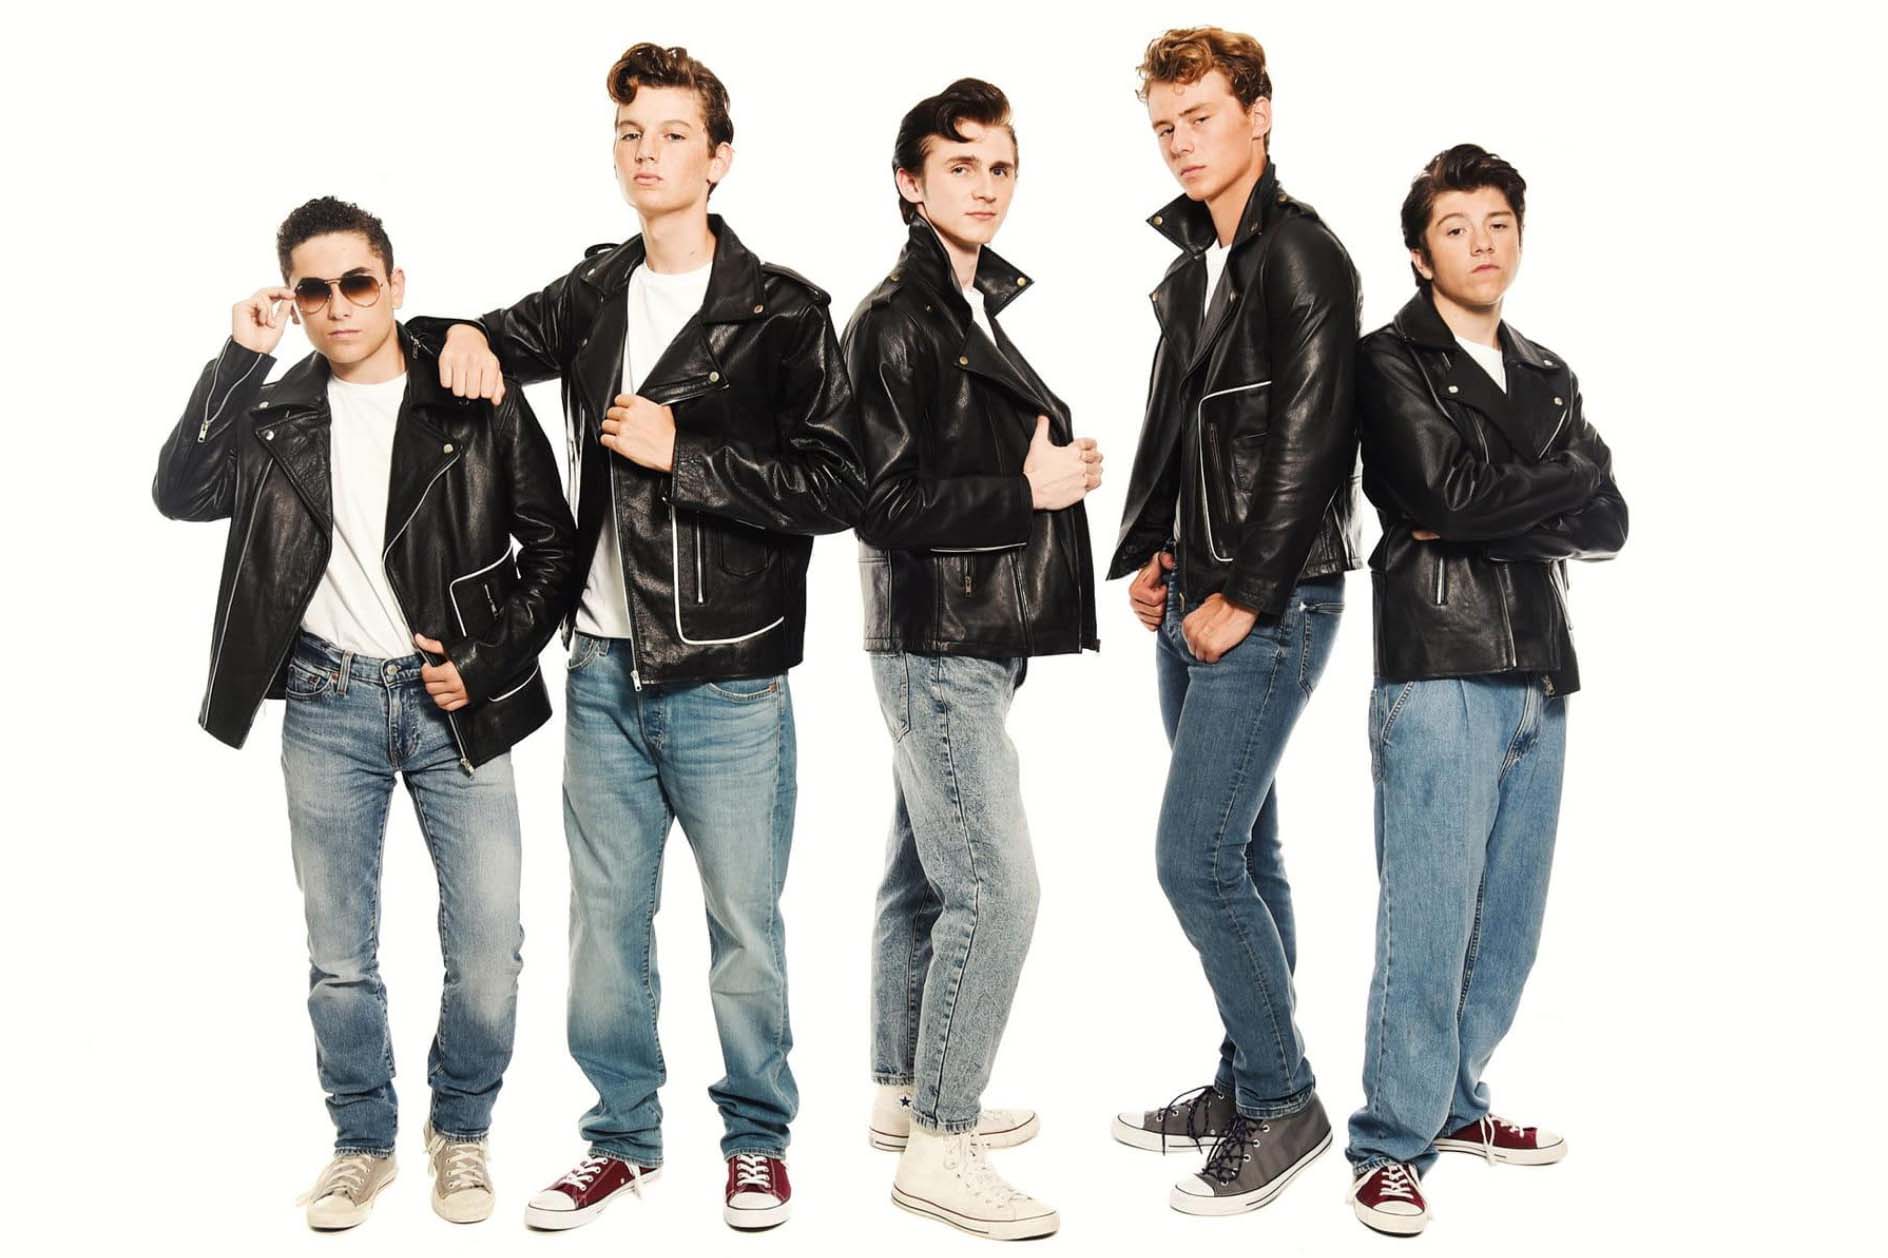 Stunning period costumes for the cast of Grease the musical. Tee birds costumes